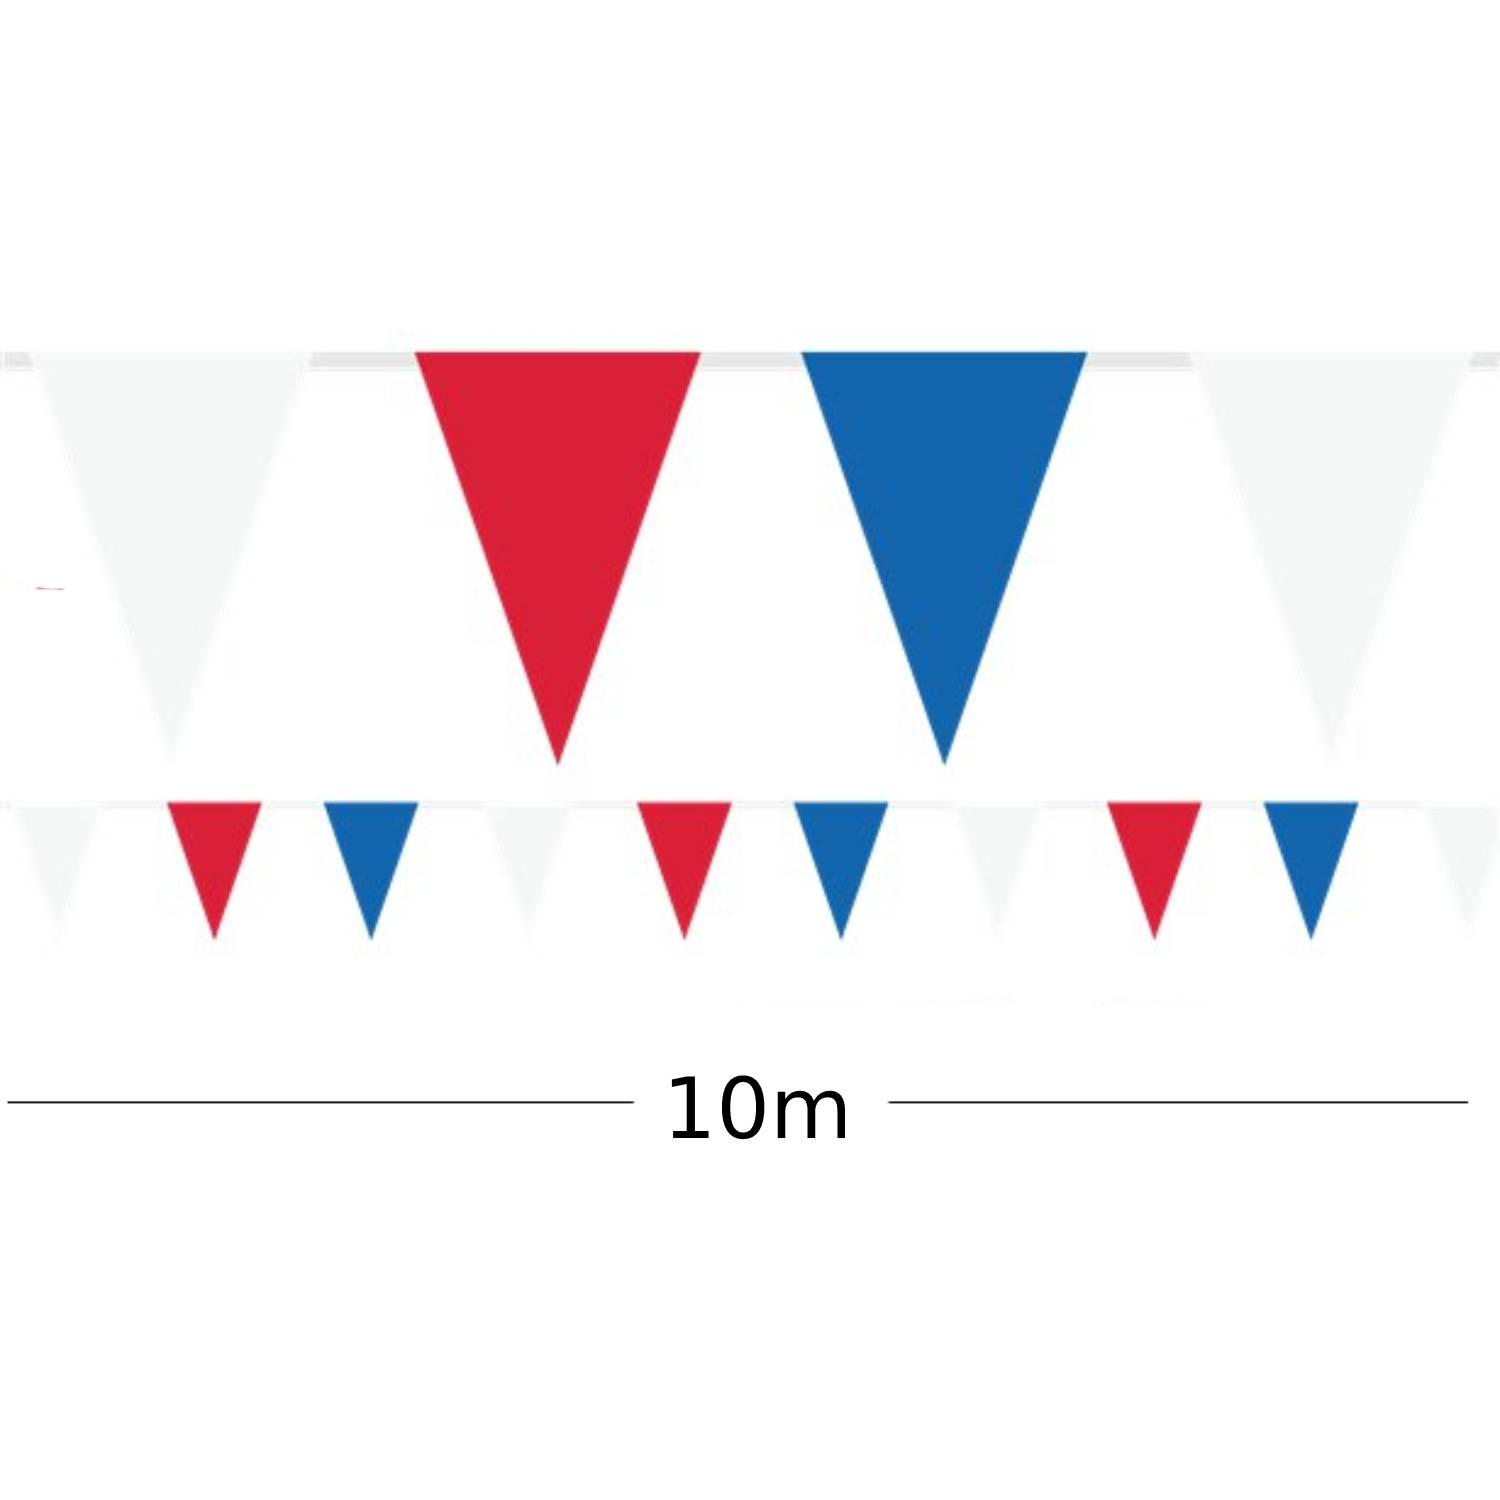 Red, White and Blue 10m Pennant Flag Bunting with 40 Pennants by Amscan 9913045 available here at Karnival Costumes online party shop